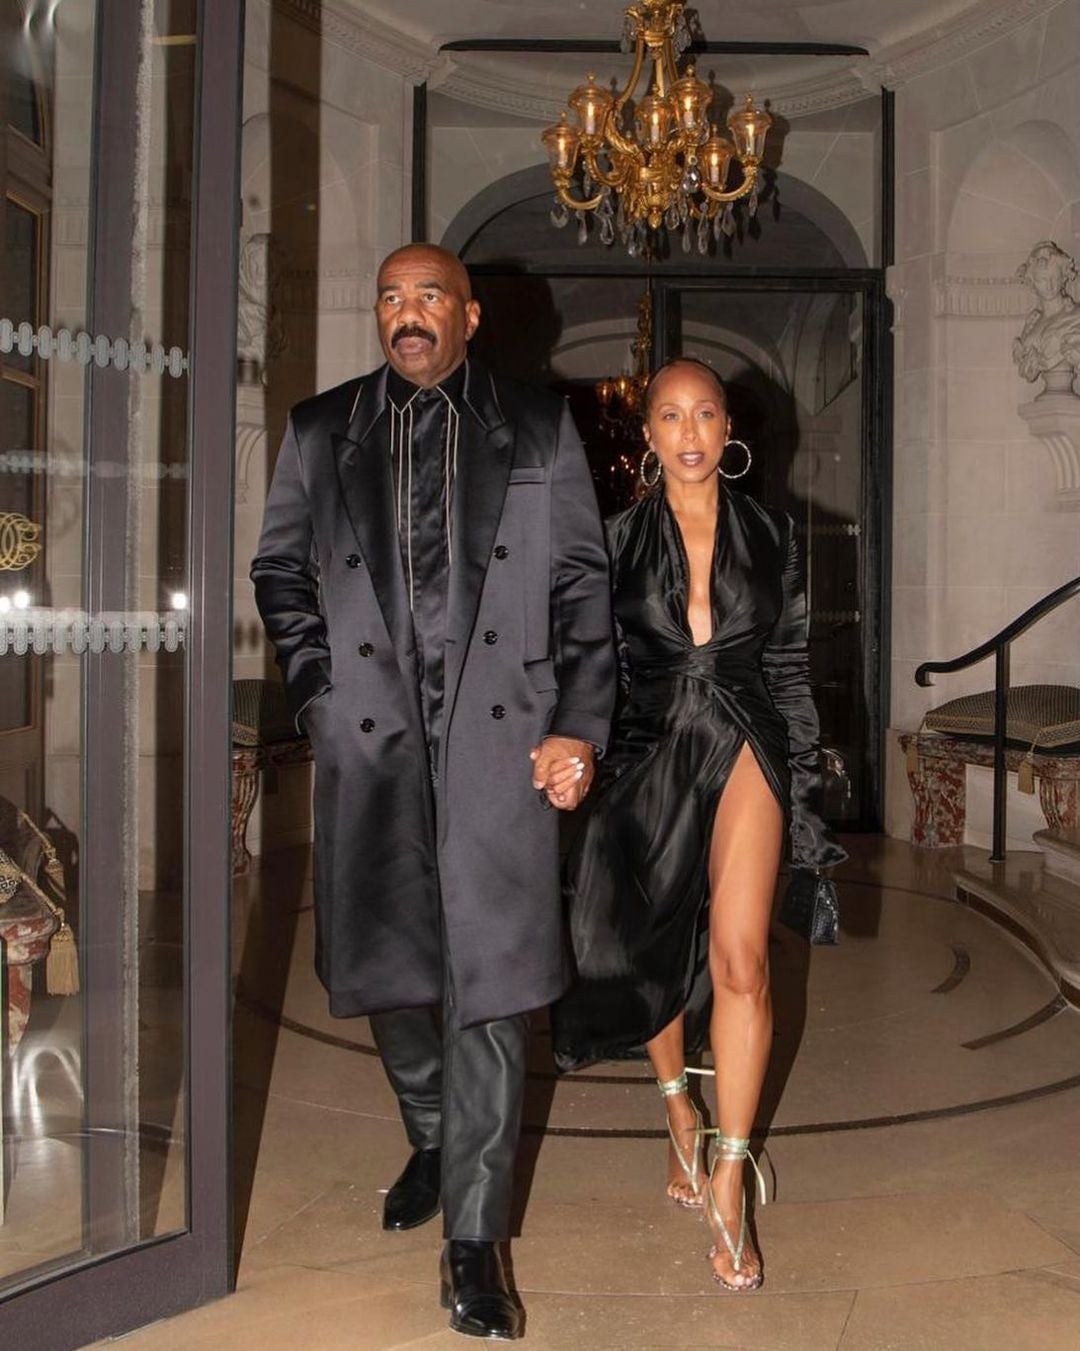 Marjorie Harvey Whole outfit is the BizNess!